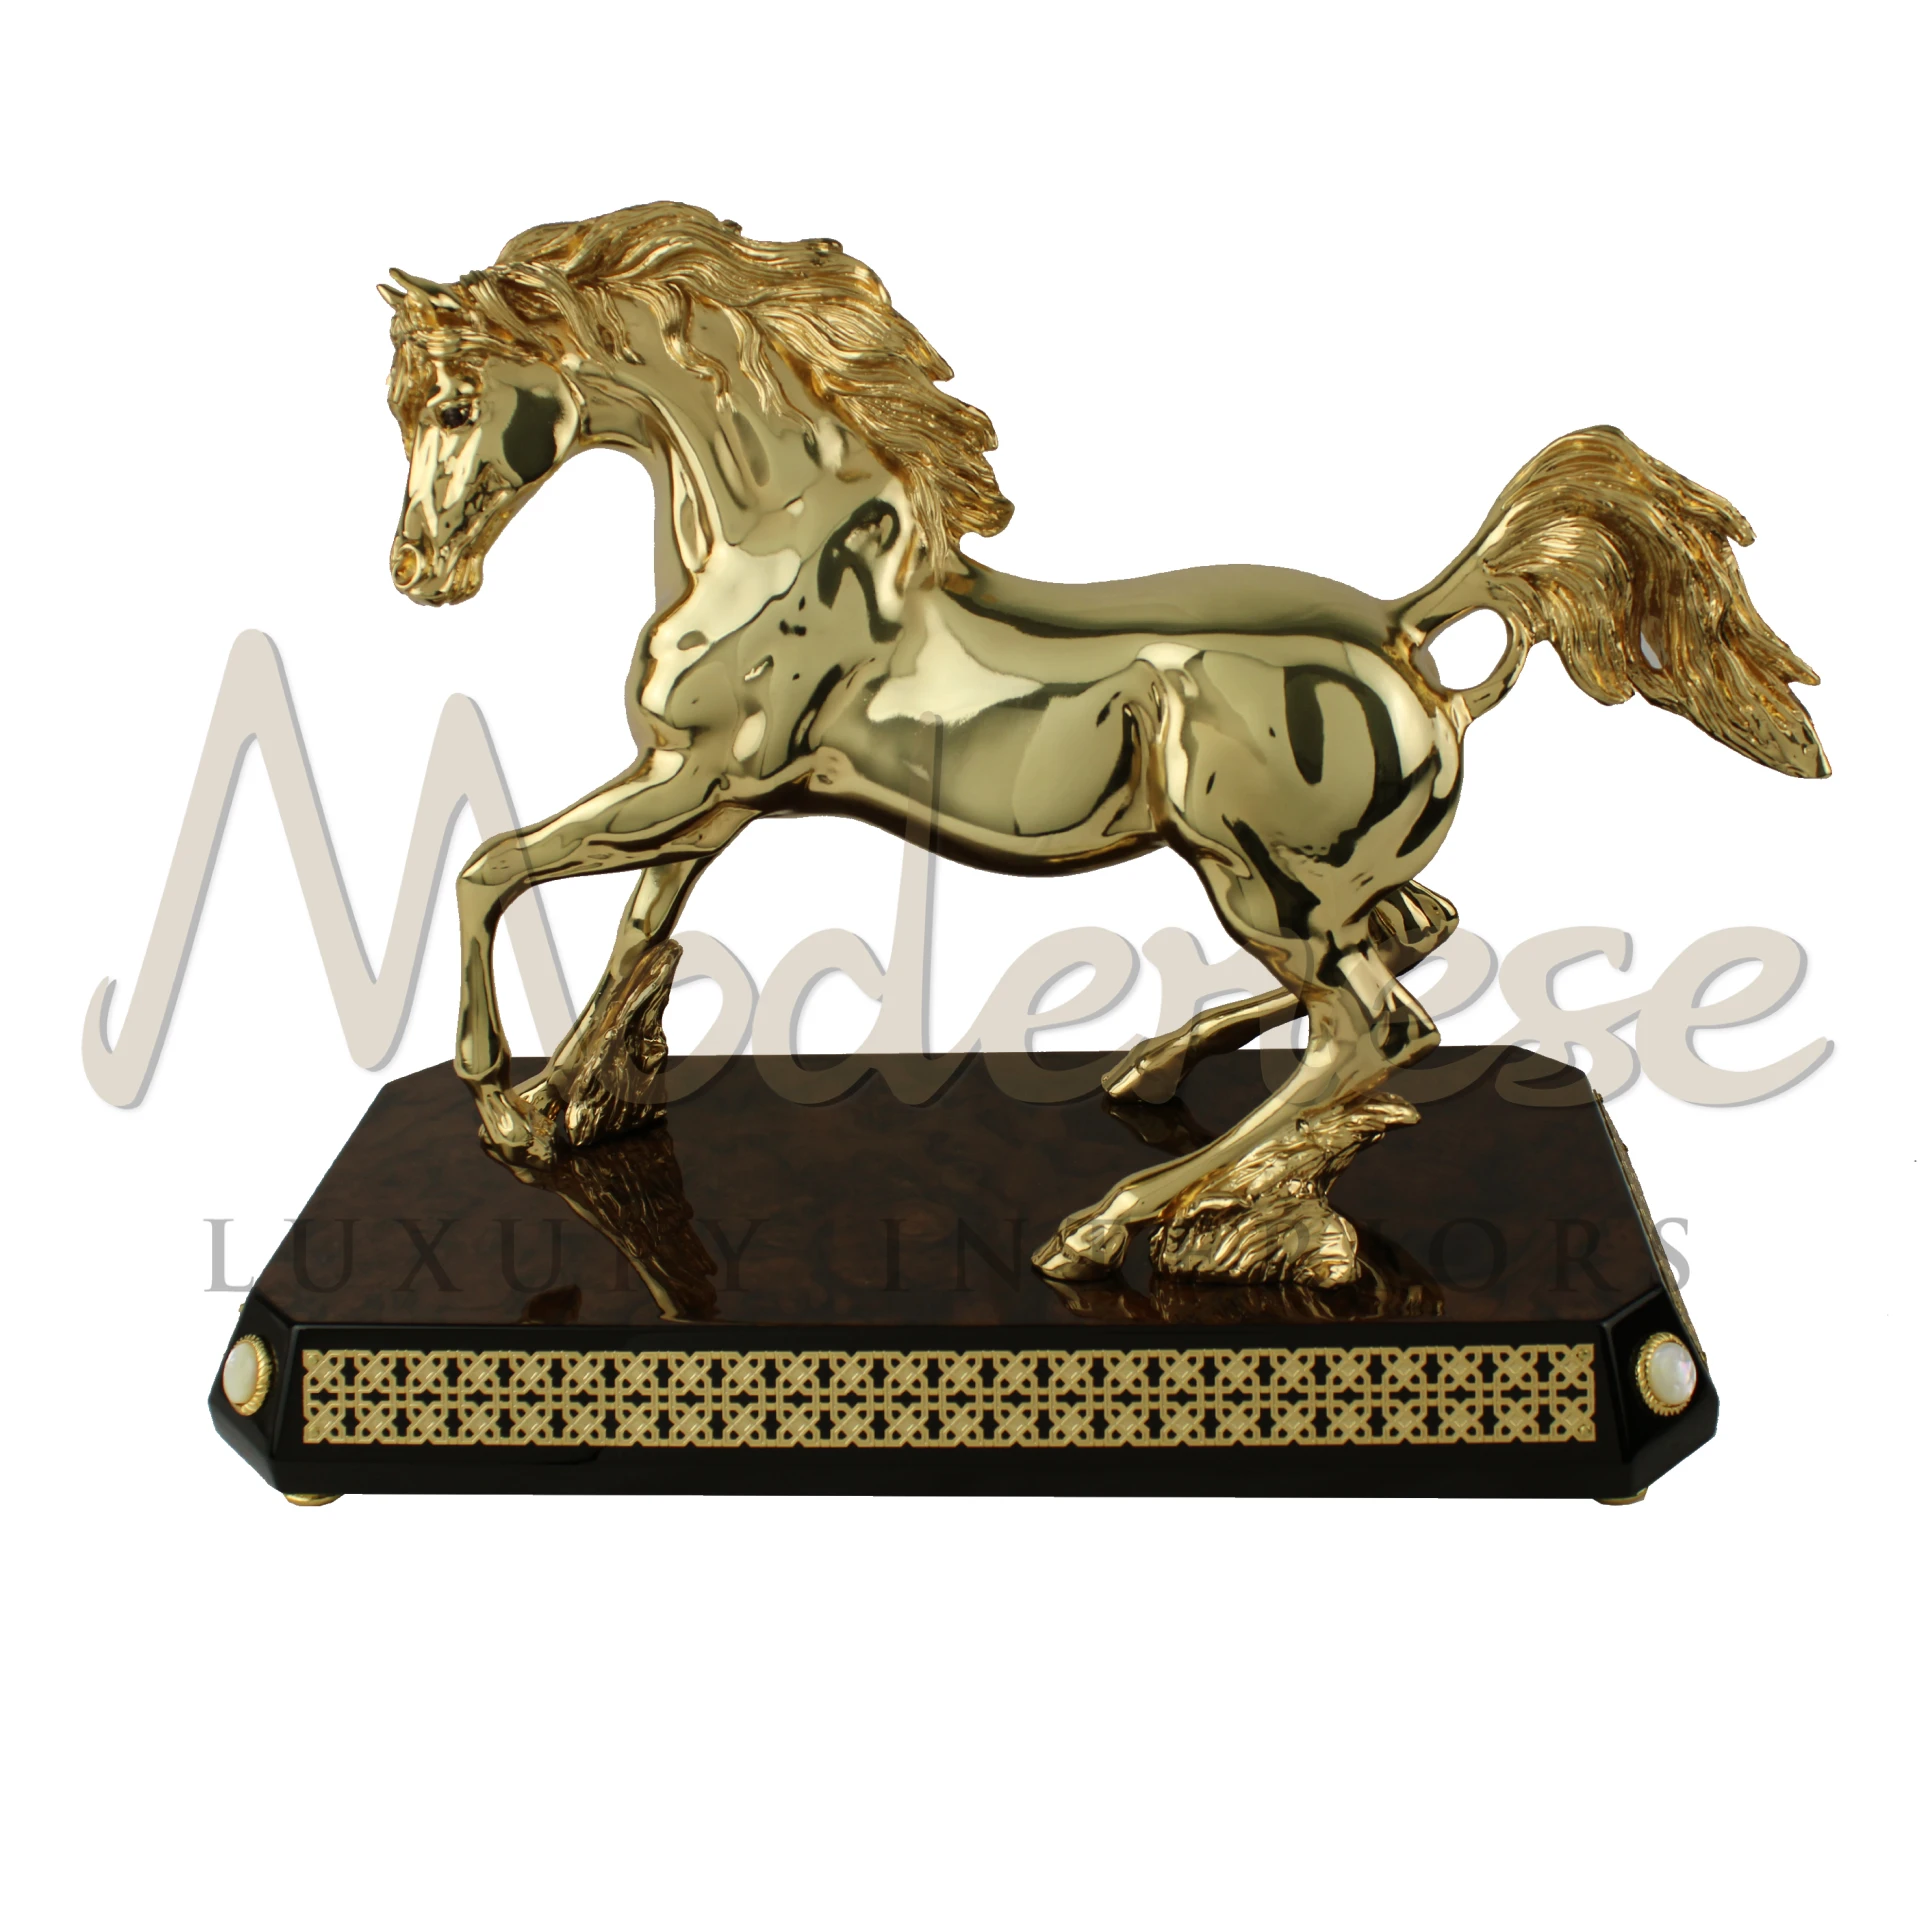 Luxury Italian Design Horse, a symbol of sophistication and elegance, meticulously crafted in high-quality materials.